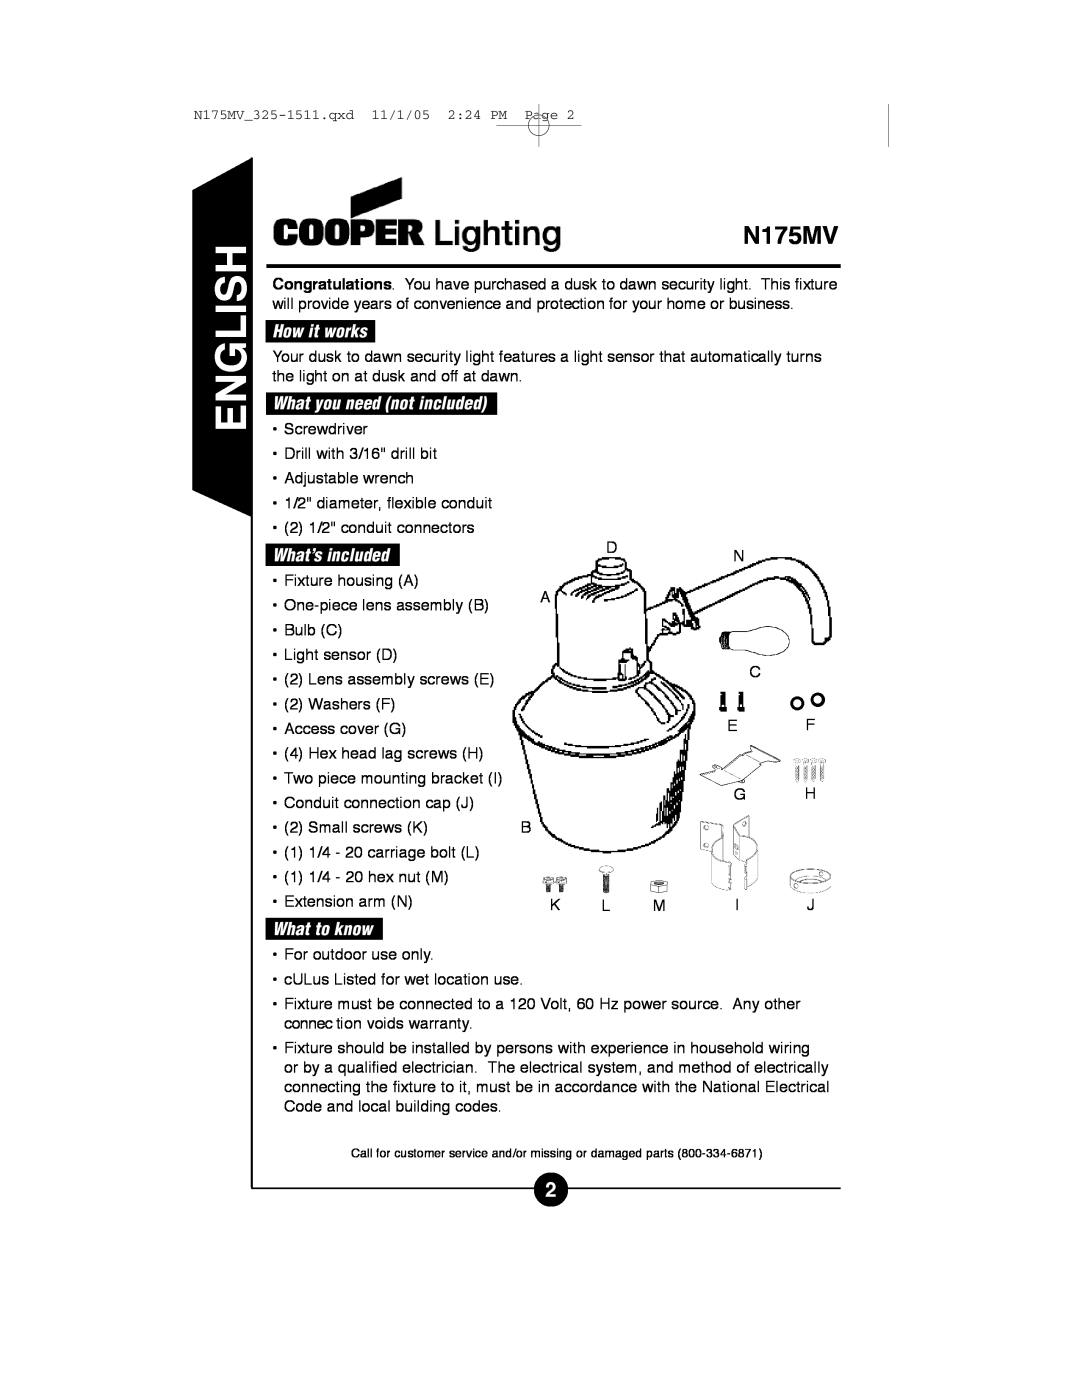 Cooper Lighting N175MV instruction manual How it works, What you need not included, What’s included, What to know 